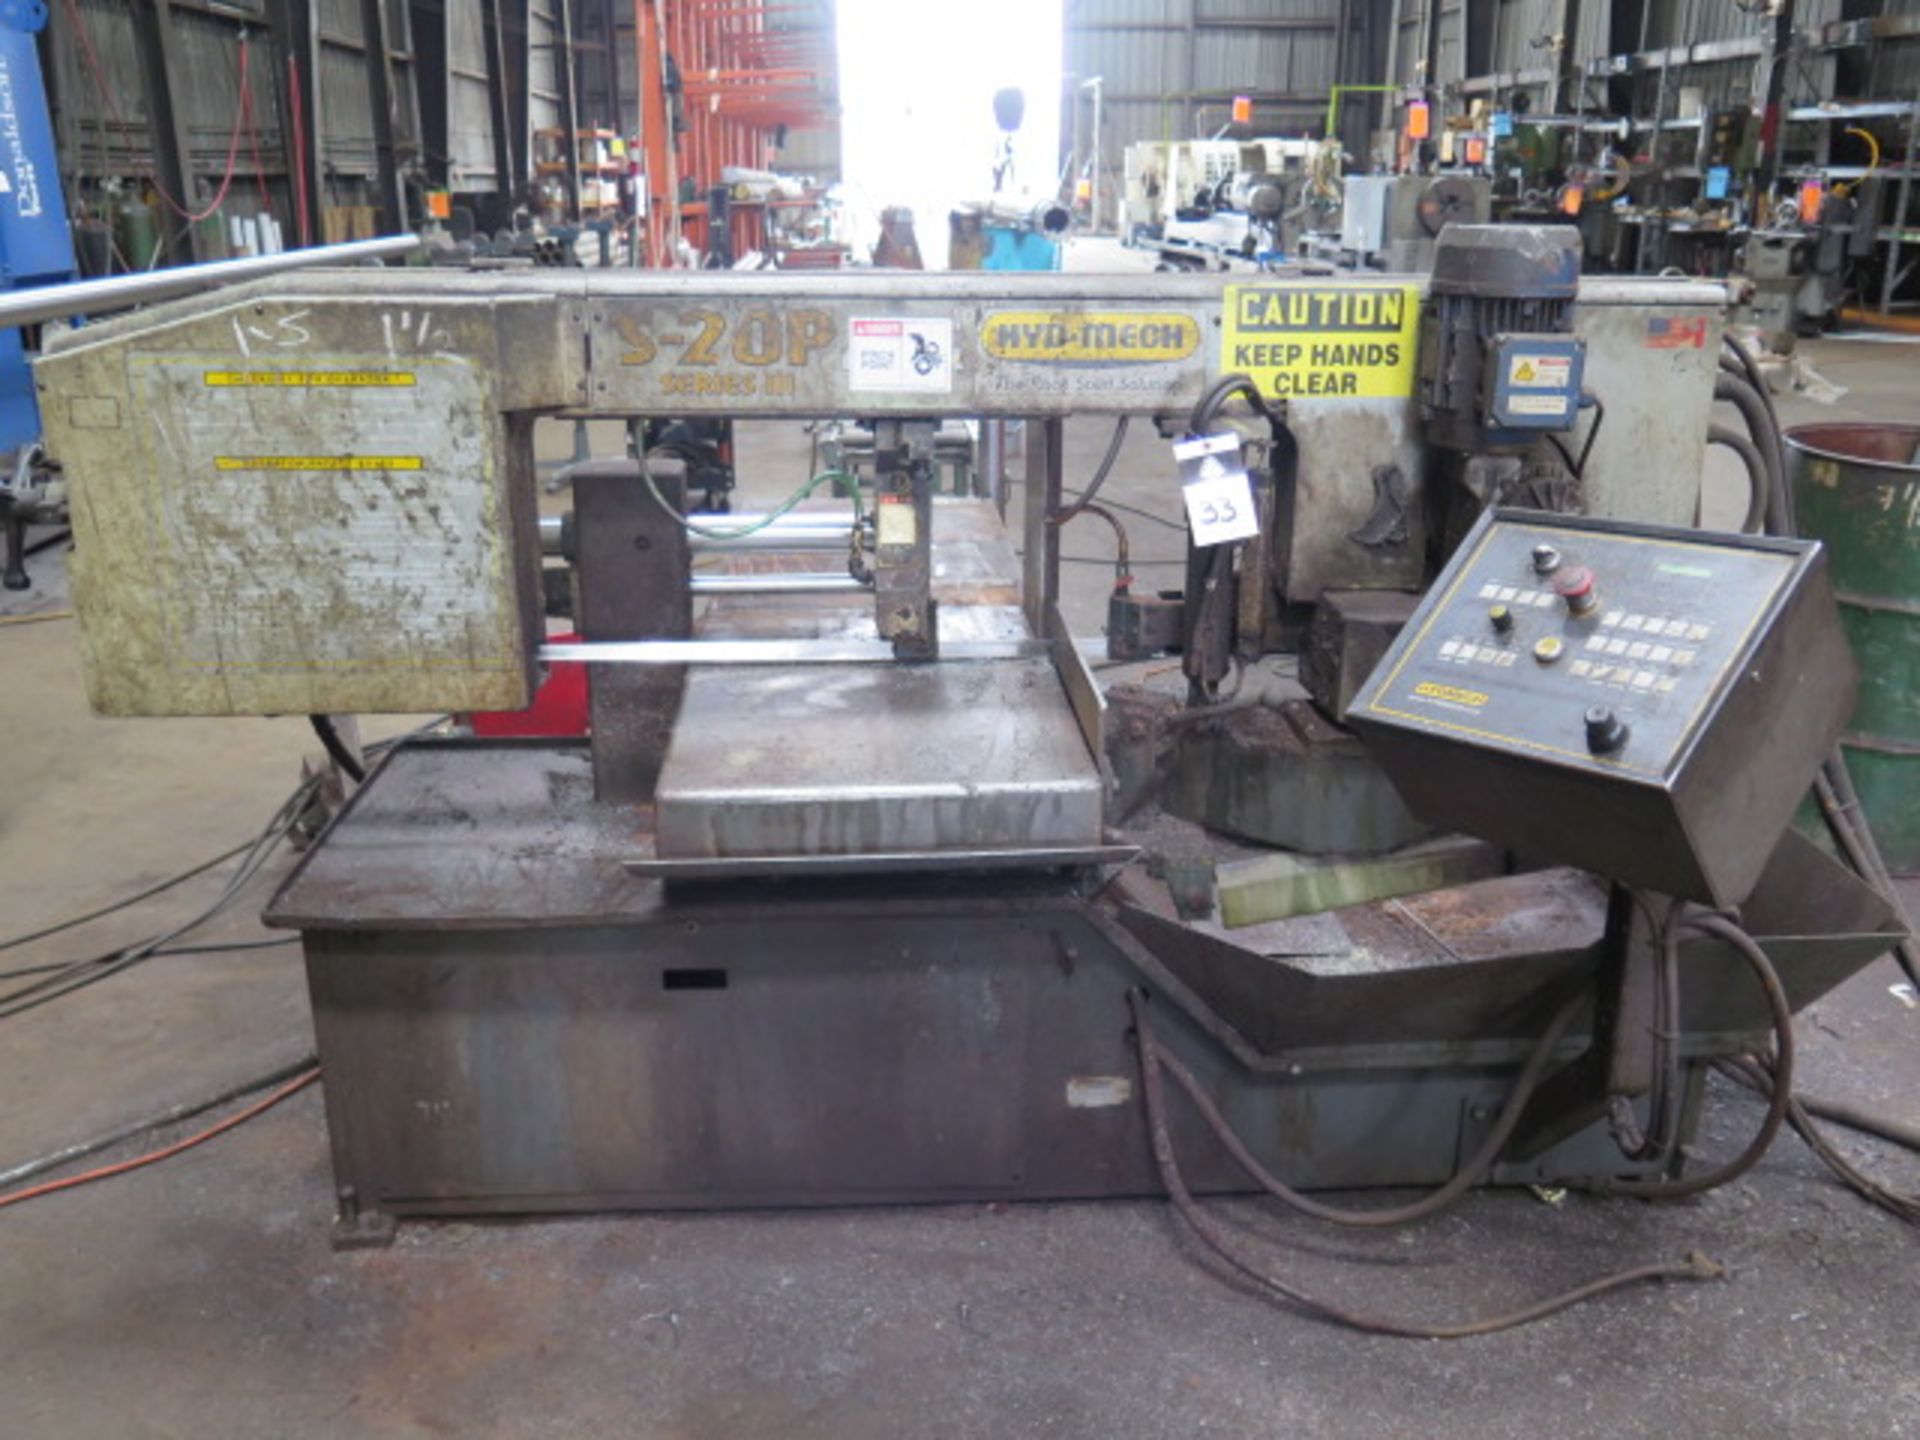 Hyd-Mech S-20P Series III 13” Horizontal Band Saw w/ Hyd-Mech Controls, Hyd Clamping, SOLD AS IS